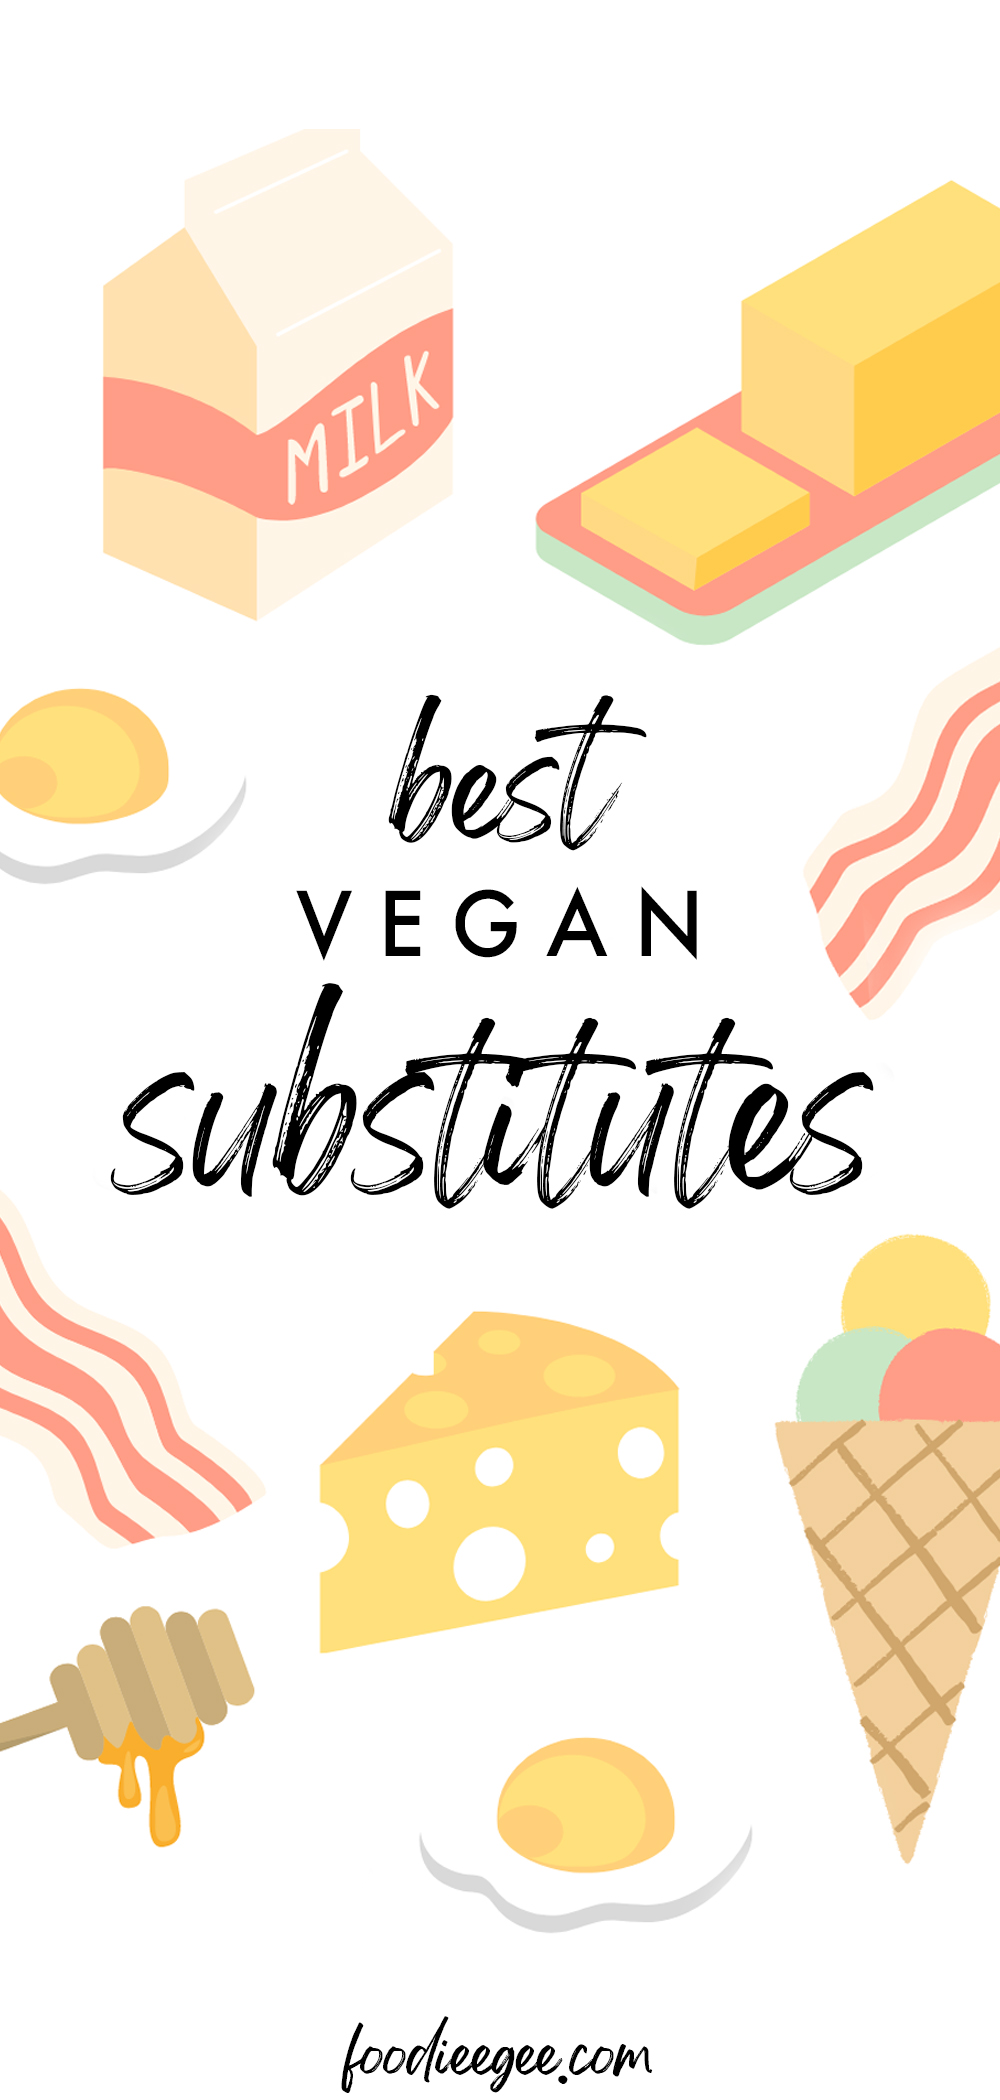 vegan cheese alternatives, meat substitutes, dairy free icecream, milk, egg replacements, substitutes for butter and eggs in baking